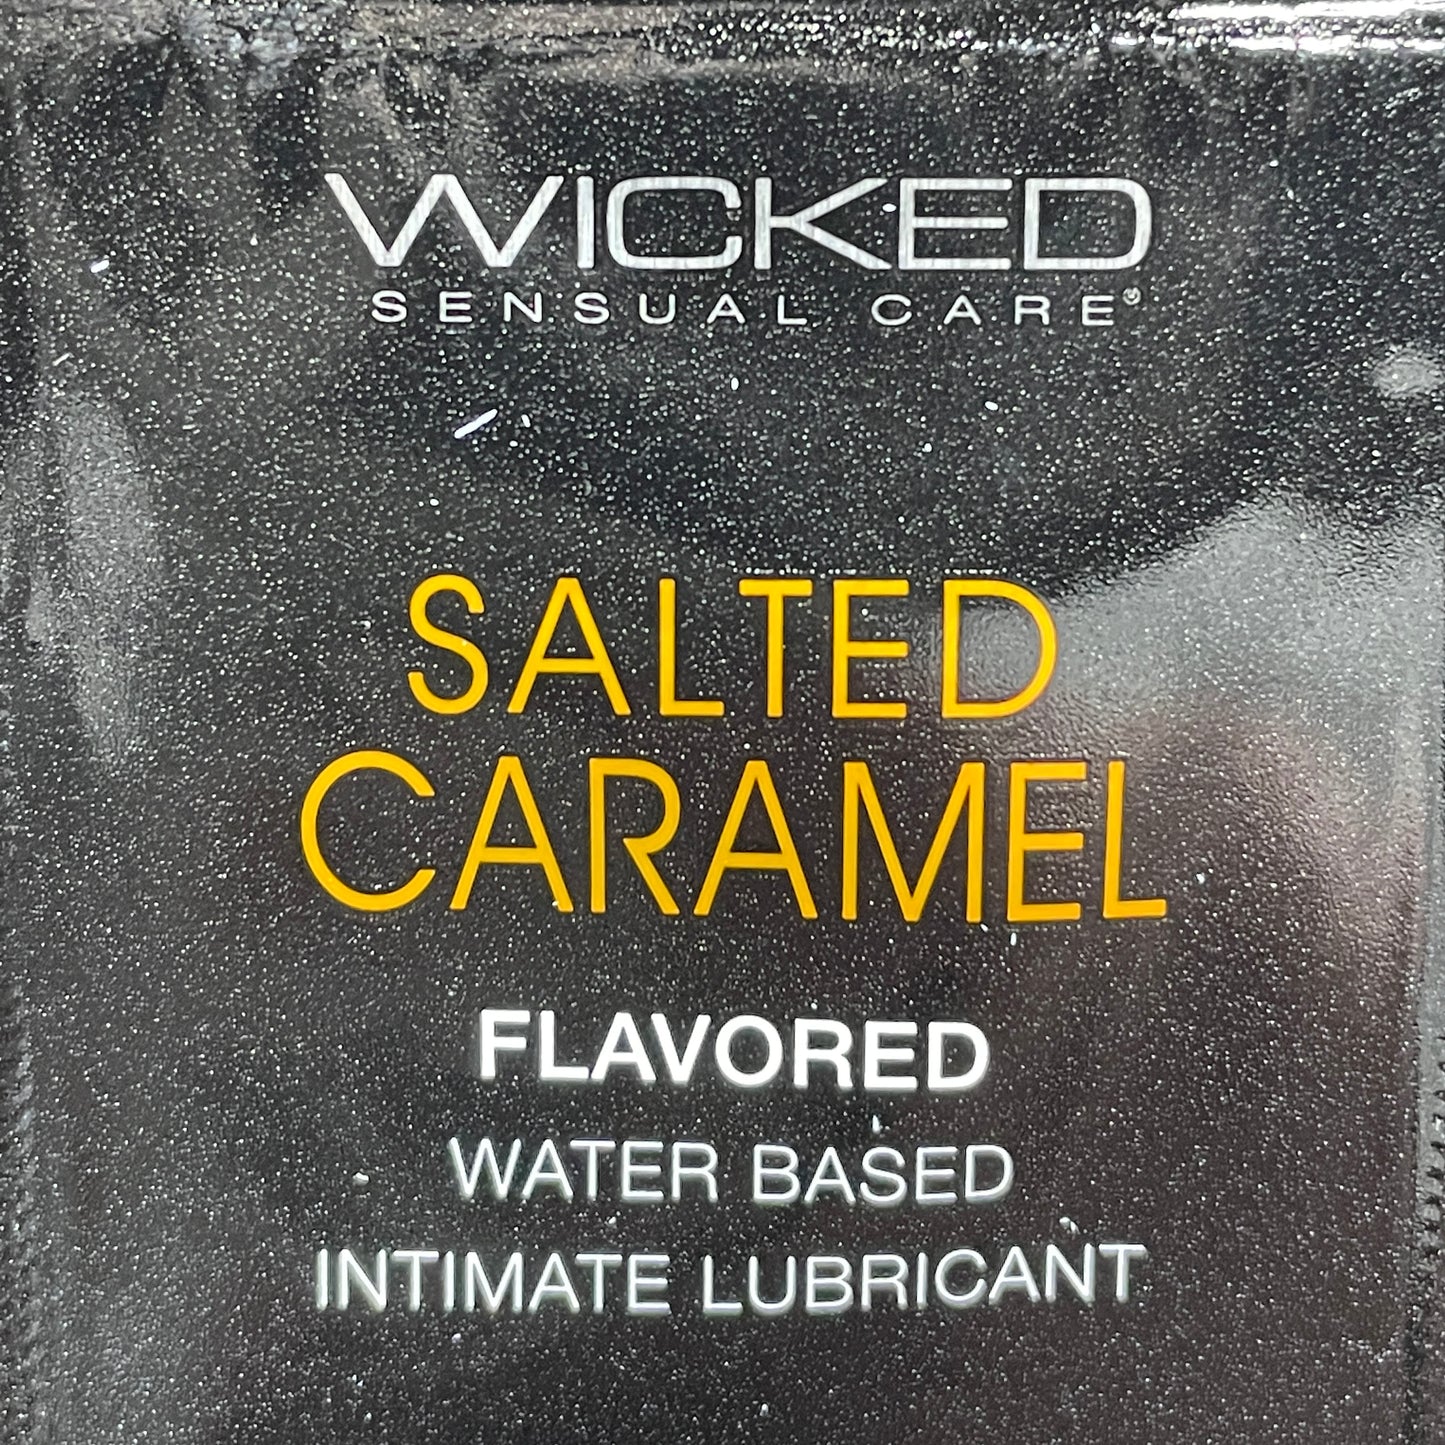 WICKED SENSUAL CARE 144-PACK Salted Carmel Flavored Water Based Intimate Lubricant .1 oz (New)